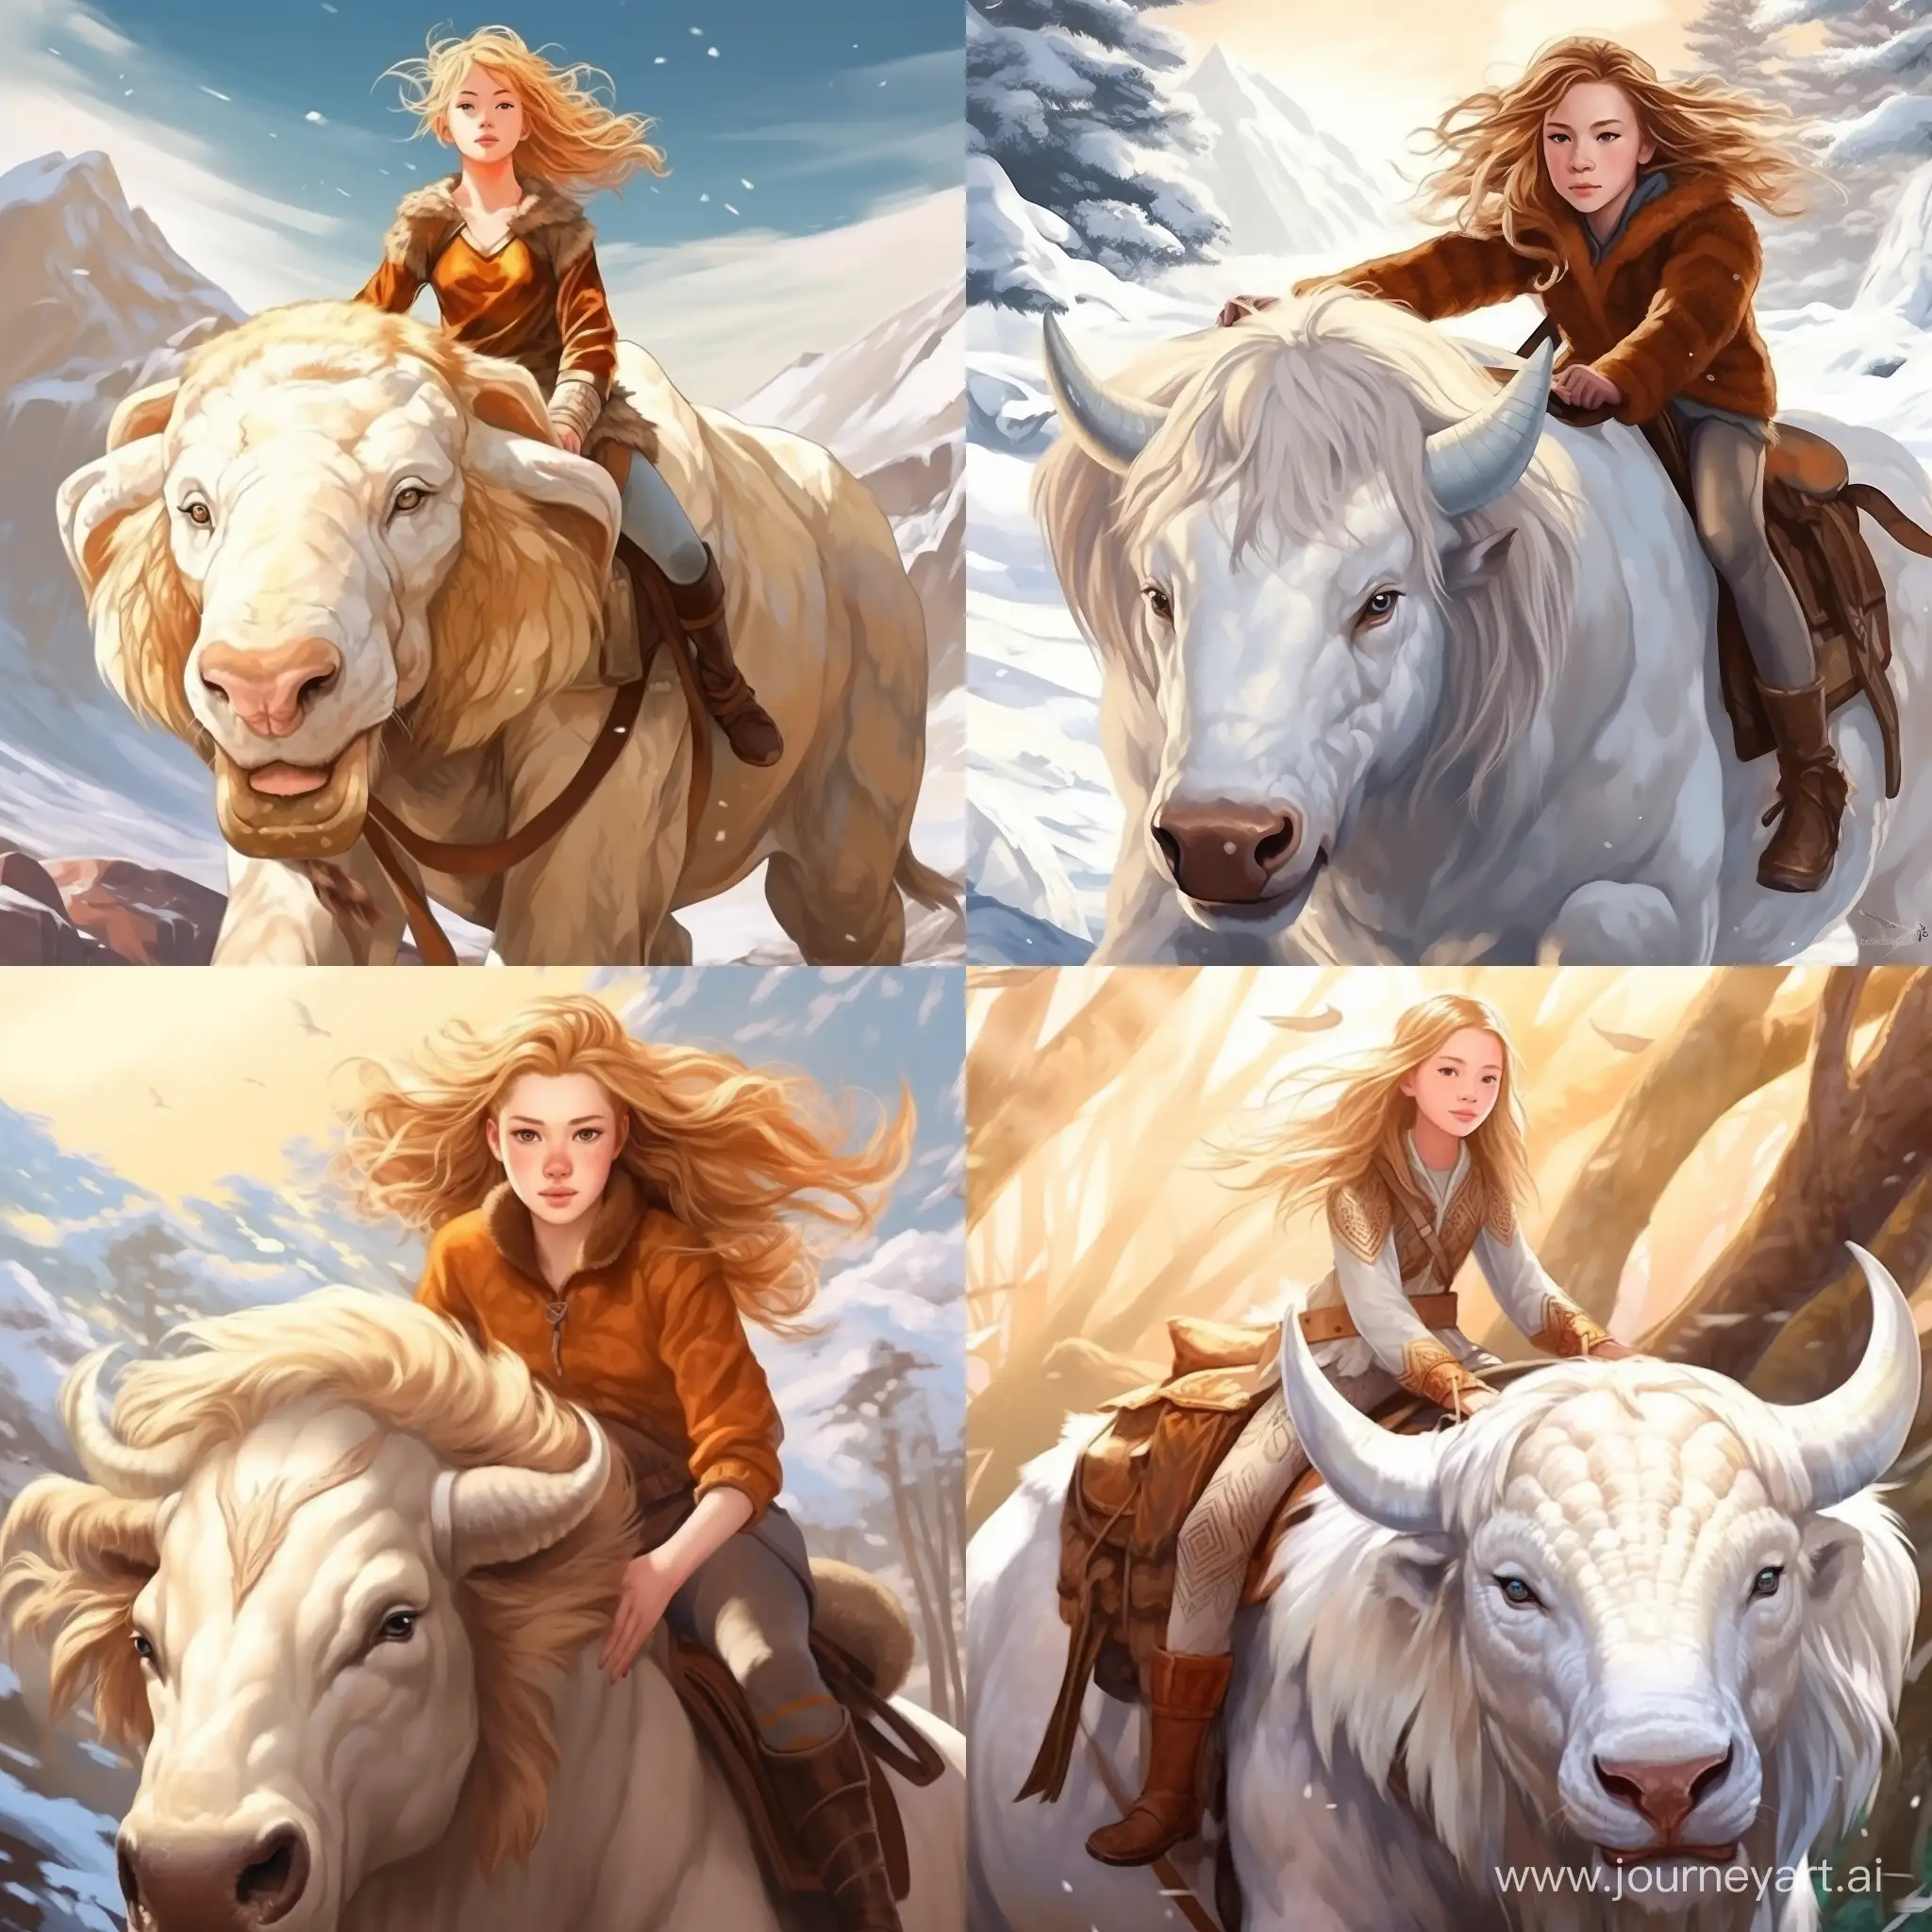 Beautiful girl, golden hair, gray-blue eyes, snow-white skin, teenager, 14 years old, in the style of avatar legend of aang, full-length, riding a flying bison, Appa, high quality, high detail, cartoon art